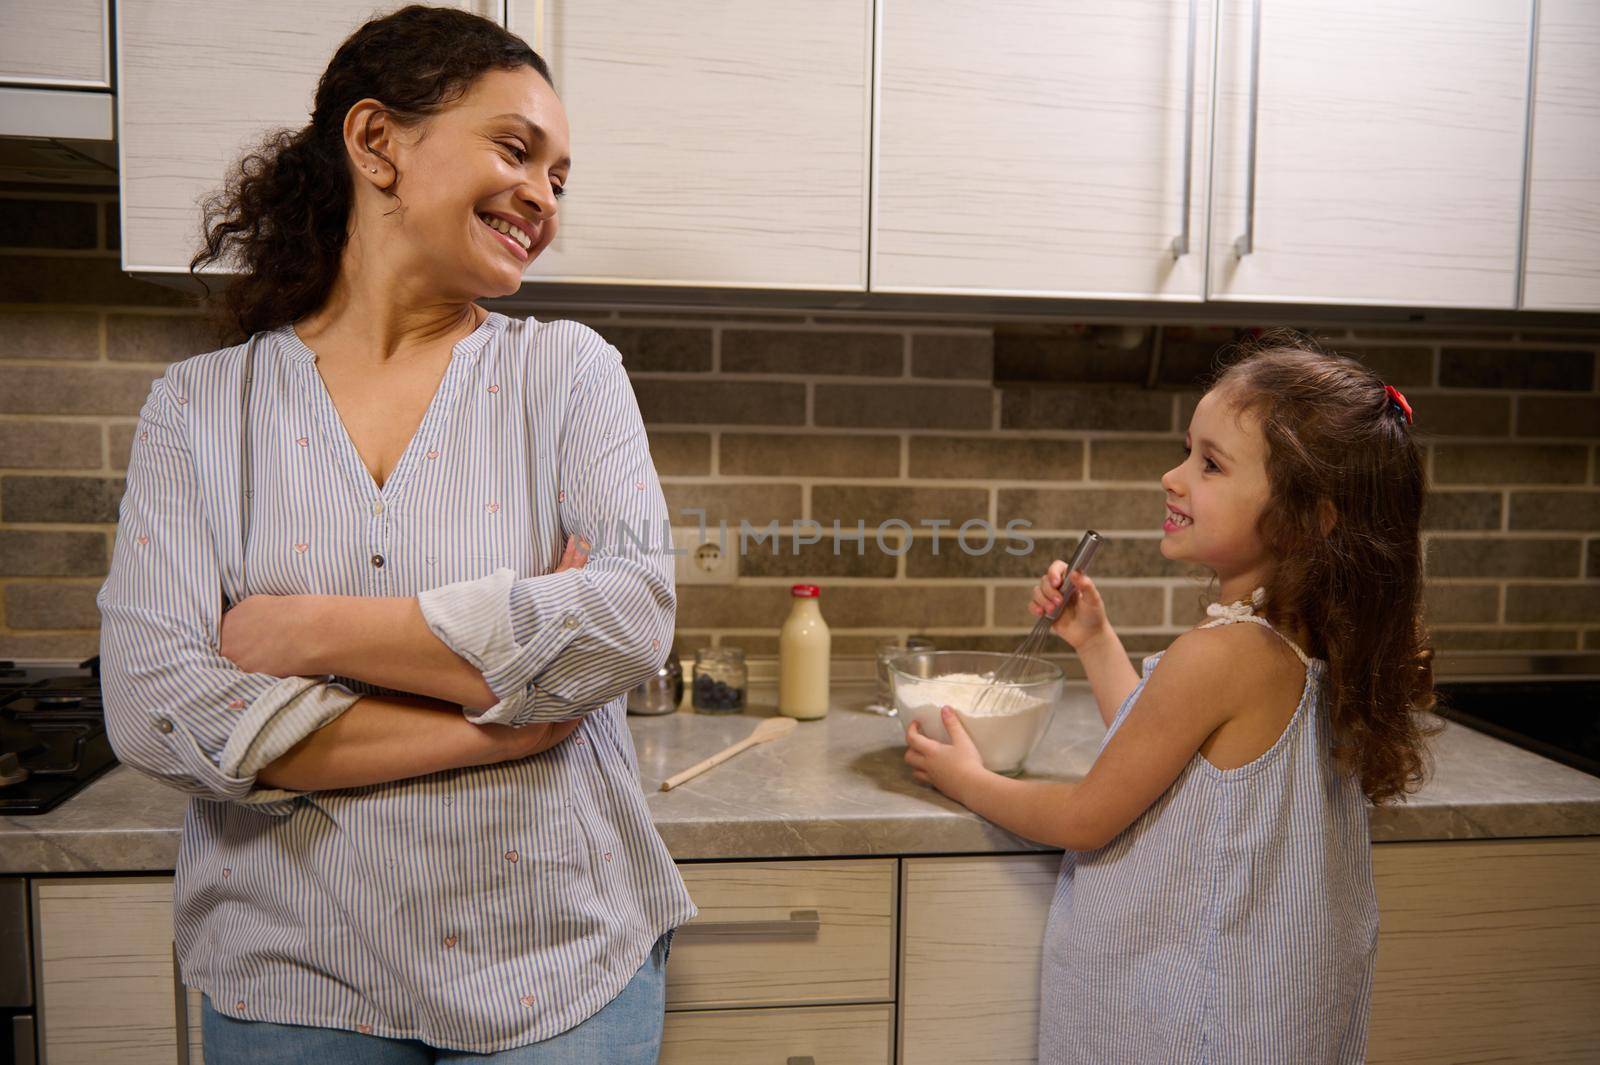 Beautiful smiling woman, happy loving mother leaning at kitchen countertop and admiring her adorable daughter cute baby girl mixing ingredients in a glass bowl while learning kneading pancakes dough by artgf